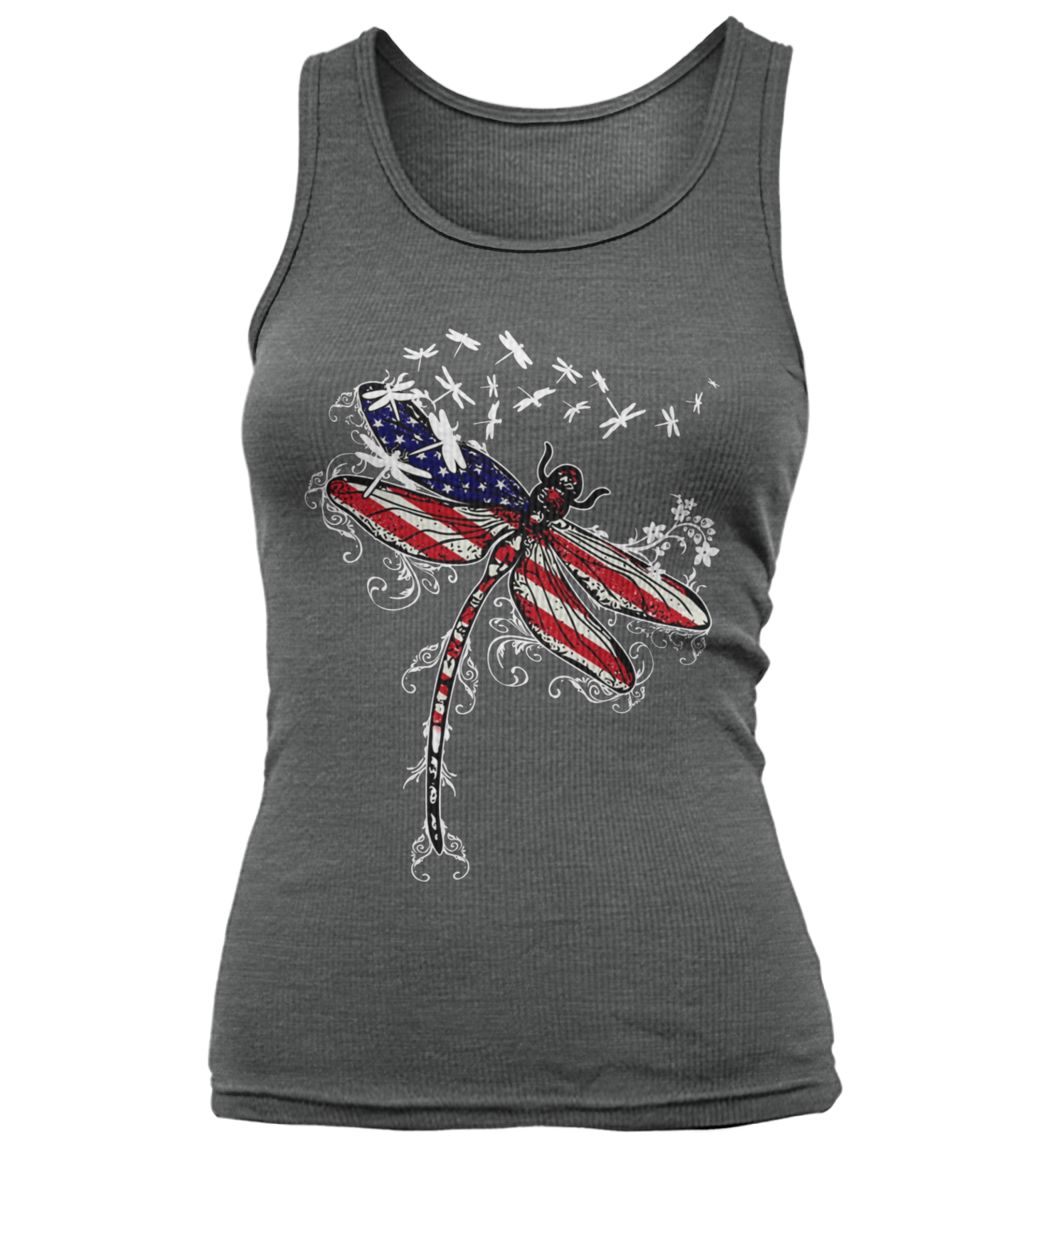 Dragonfly american flag 4th of july women's tank top